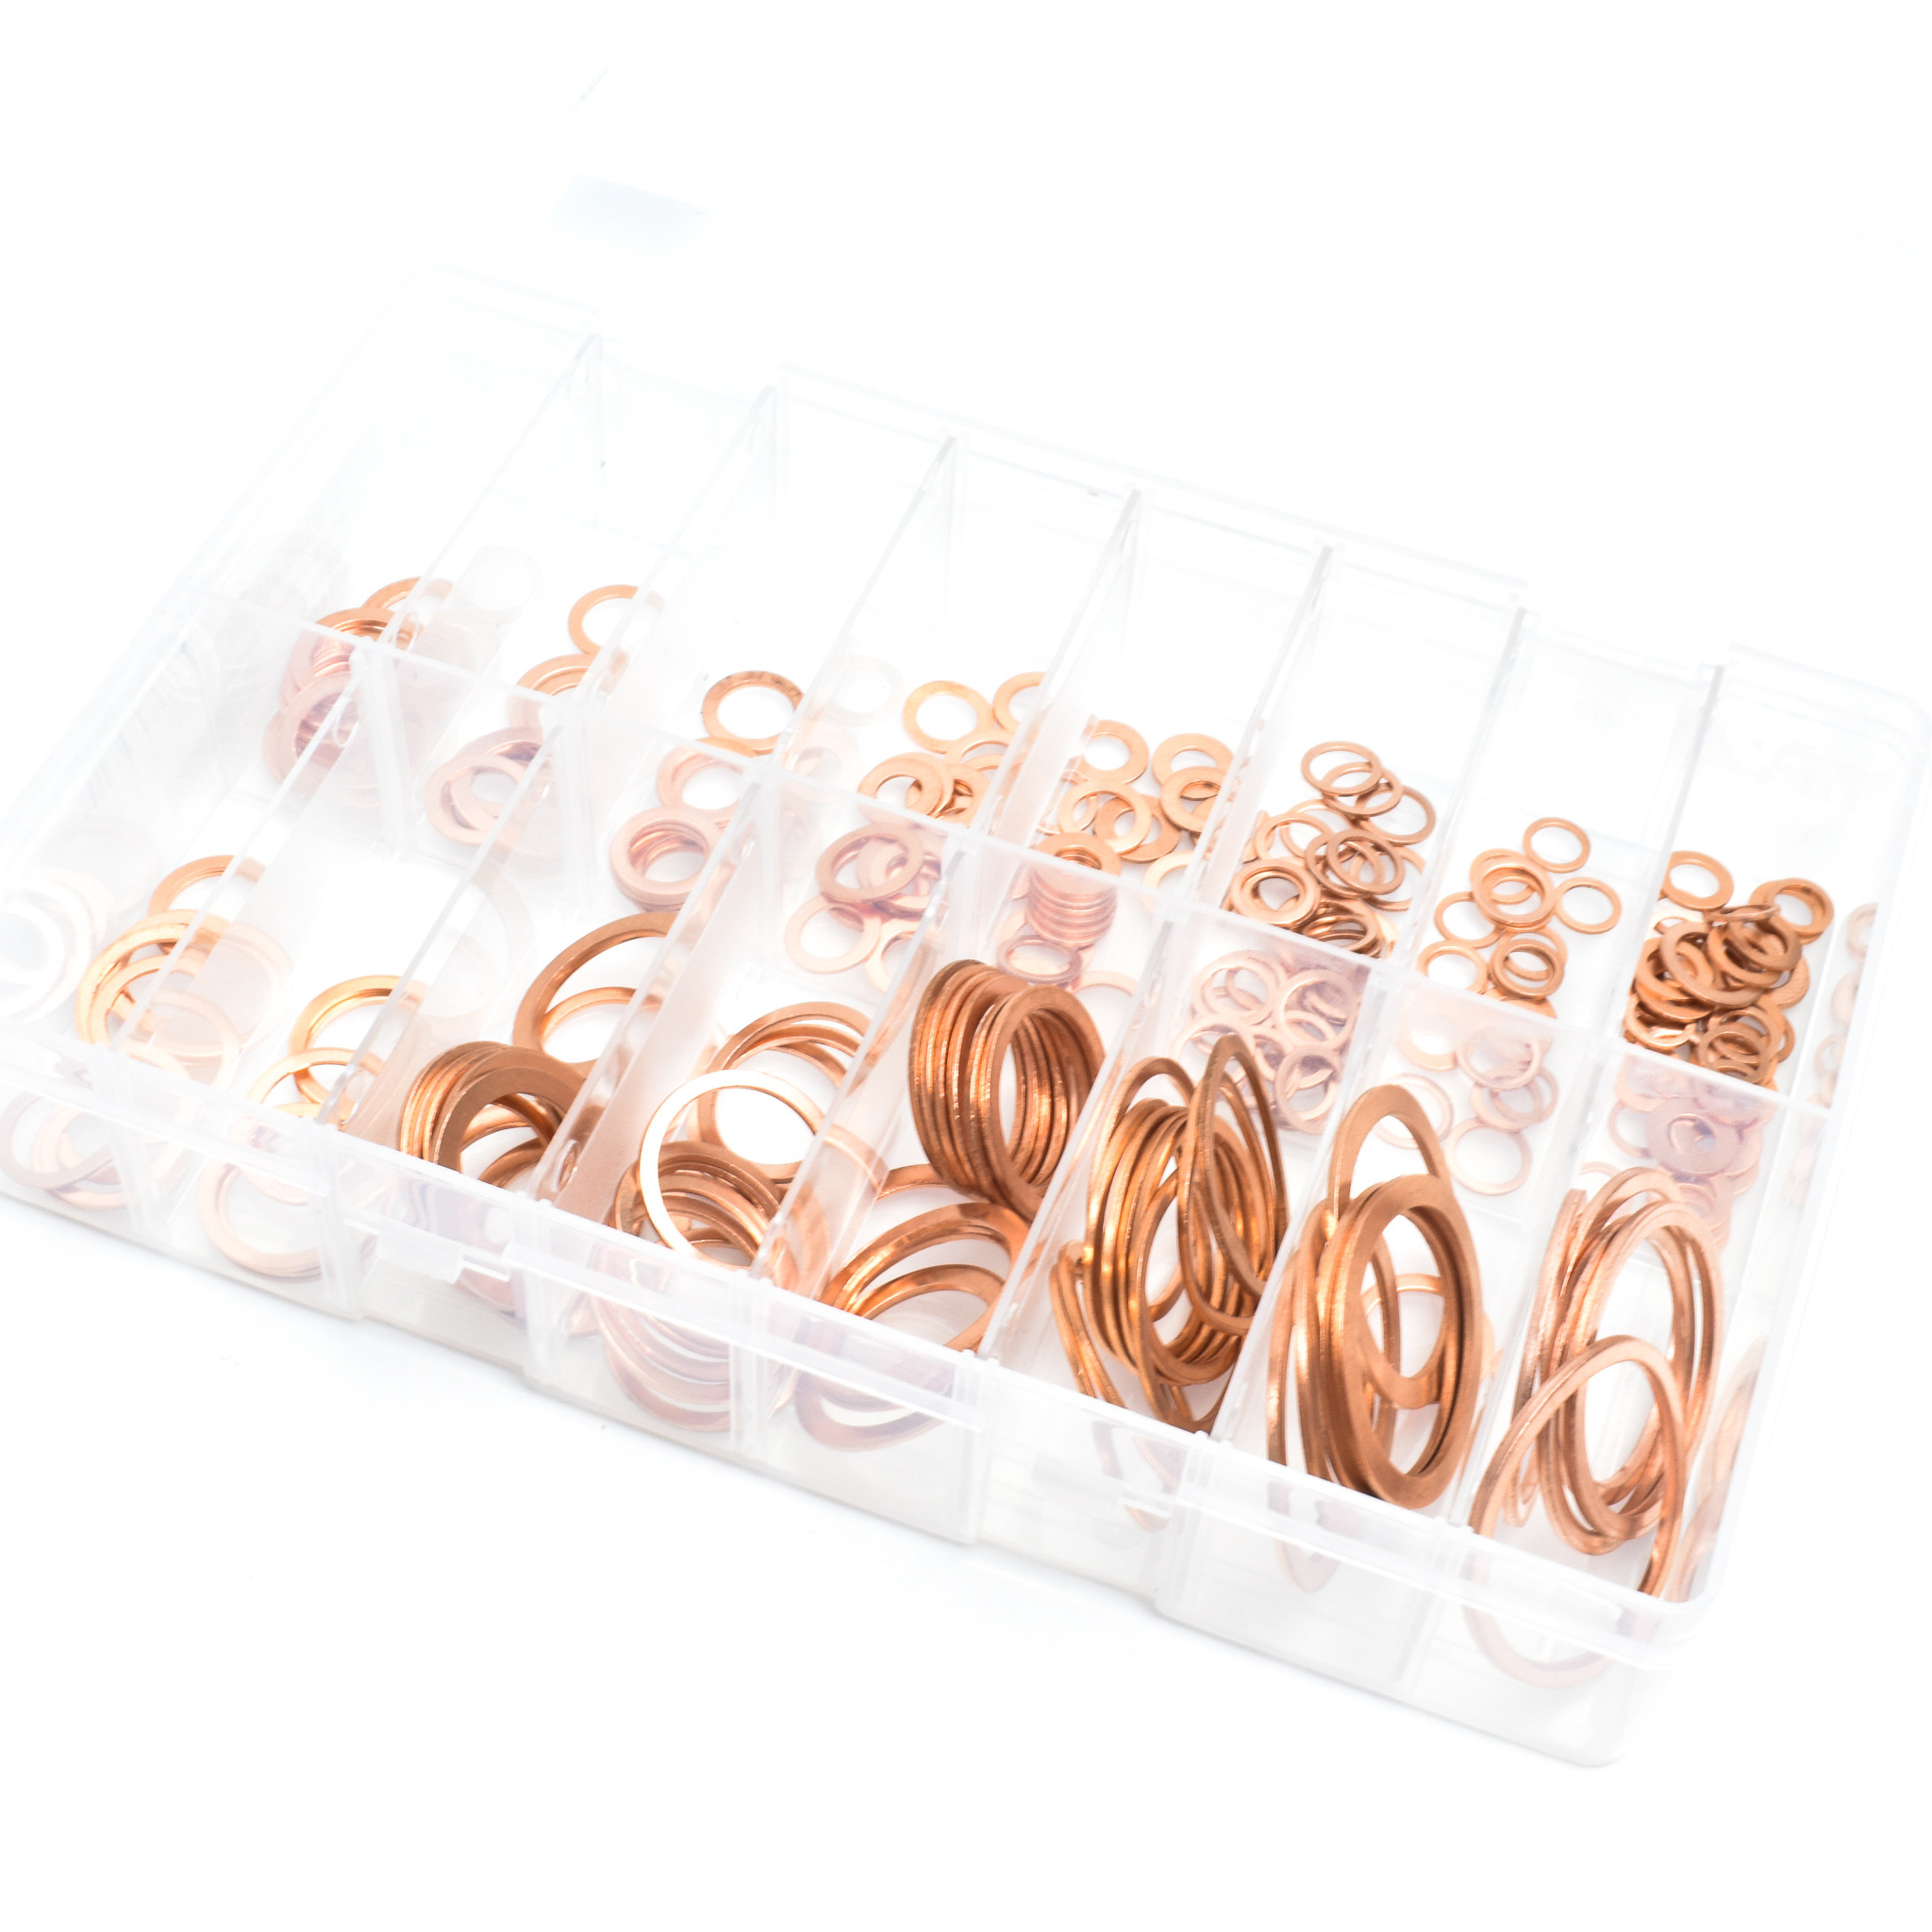 130 Piece Imperial Copper Washers Kit 1/8"BSP to 1"BSP 